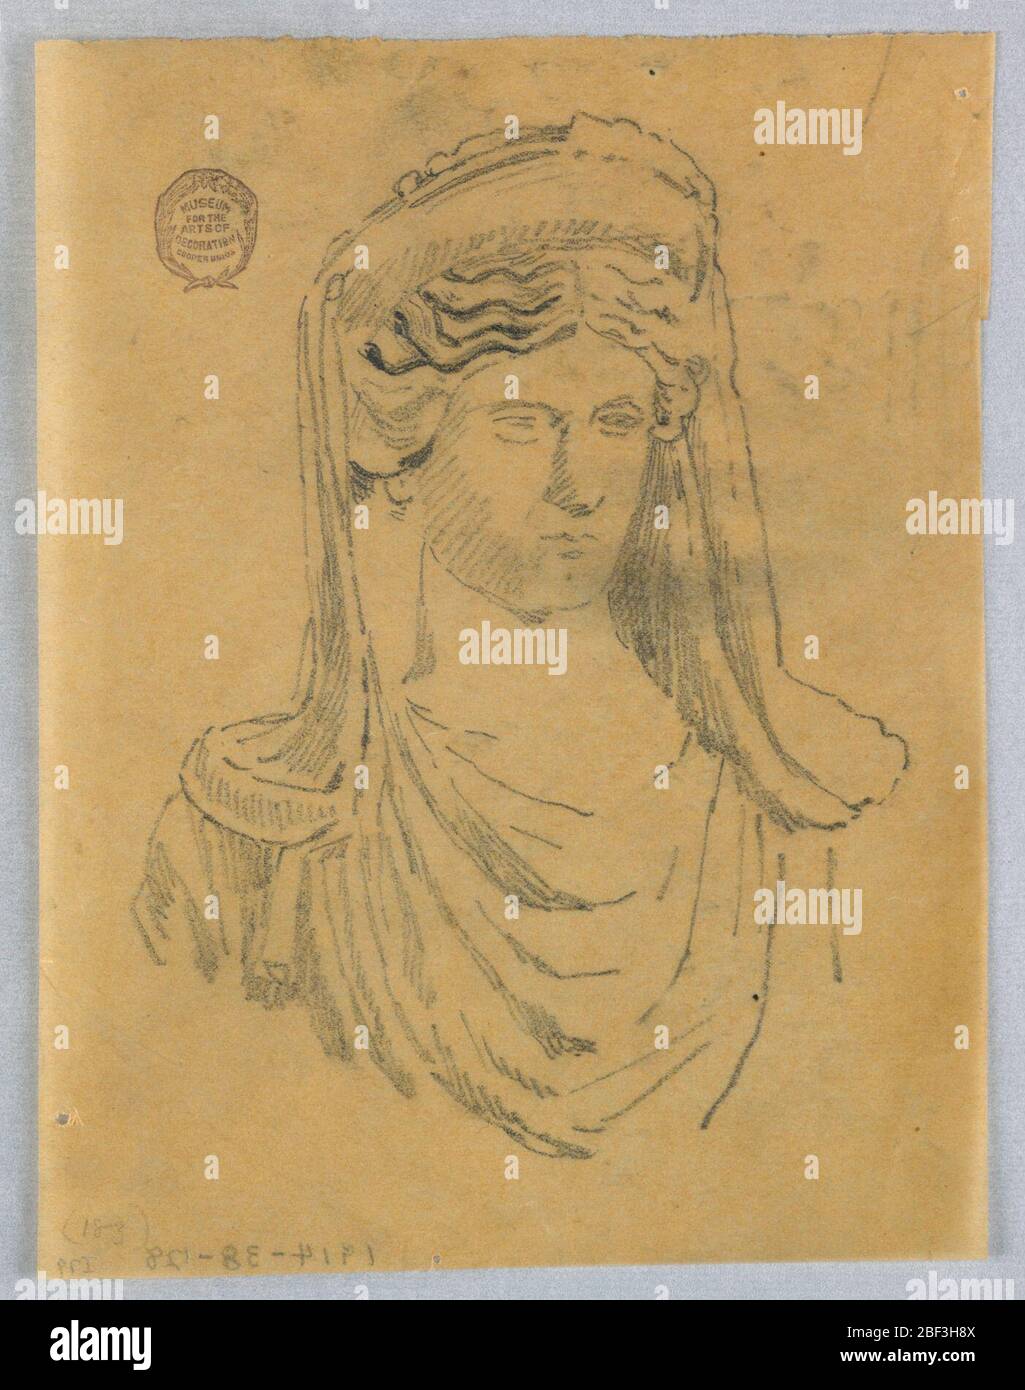 Sketch of Bust of a Woman. Bust of a woman in classical style. Hair parted  in the center, with headress and veil. Head turned slightly to the right  Stock Photo - Alamy